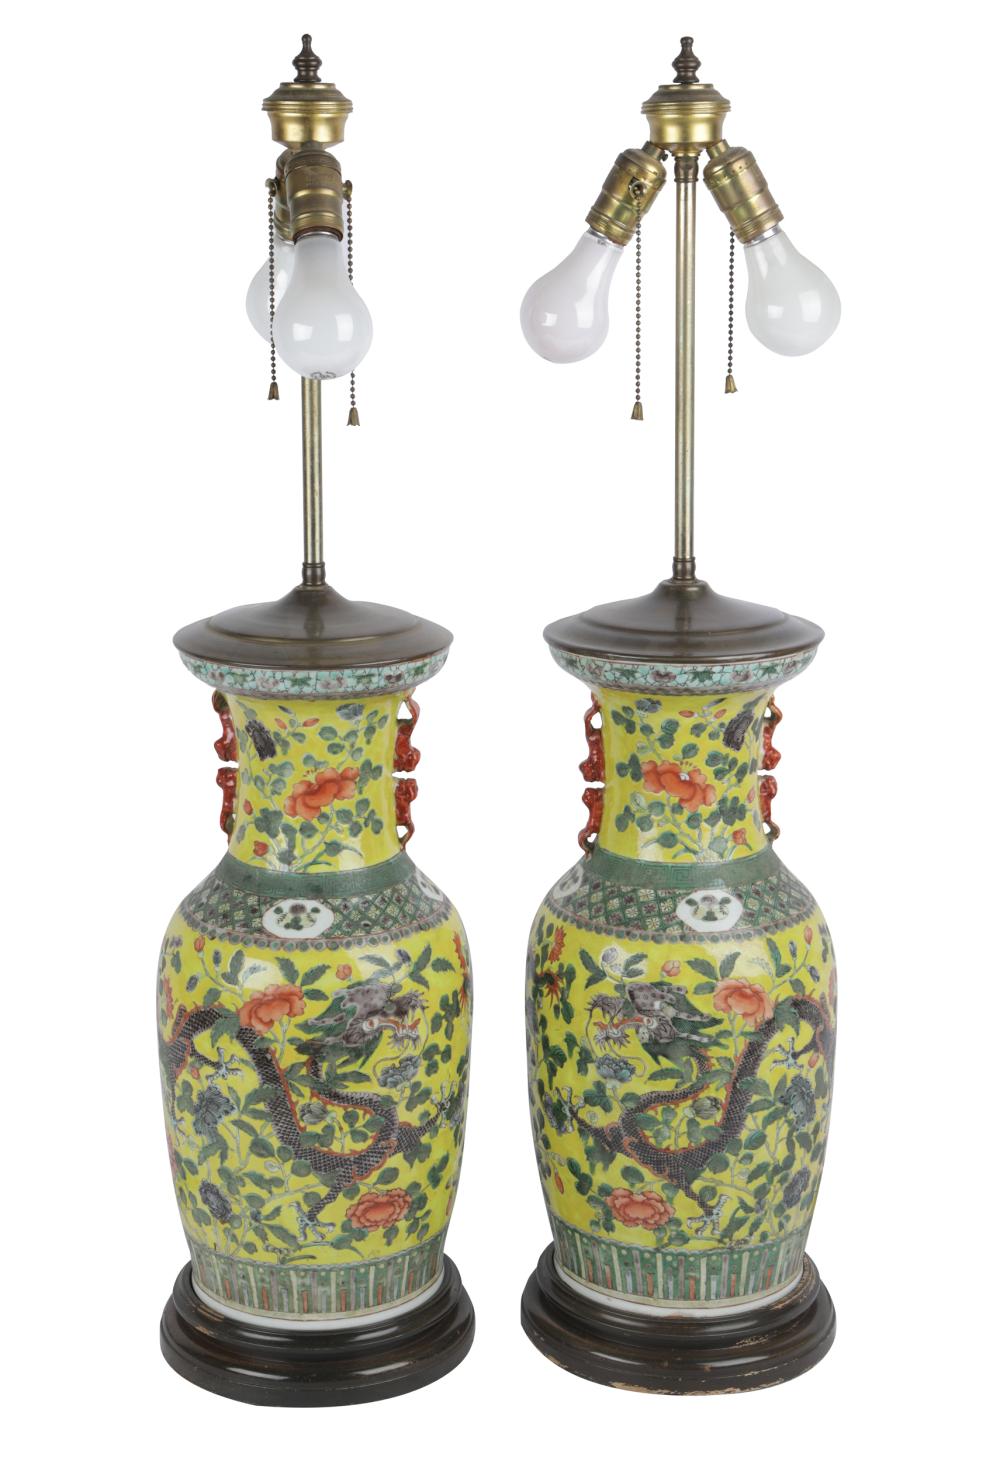 PAIR OF CHINESE FAMILLE JAUNE PORCELAIN